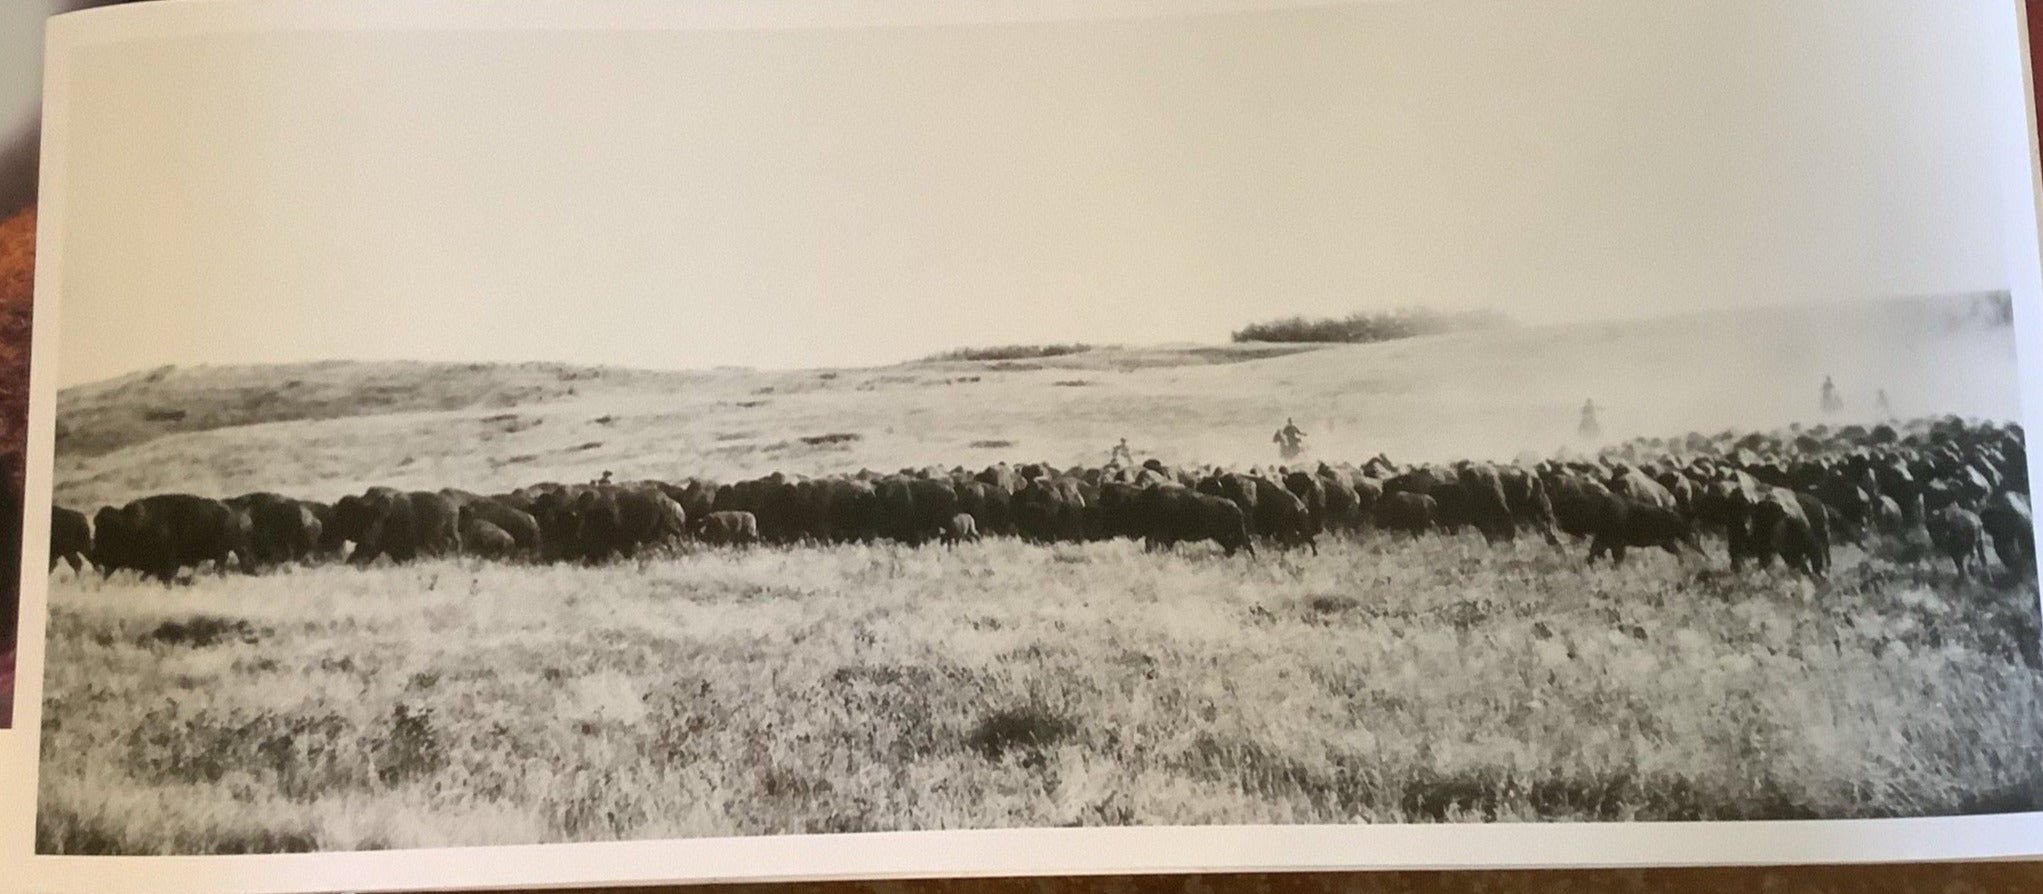 Buffalo and Riders Pano photograph - Unknown age or location, but most likely 1960 plus and Dakota's/Nebraska